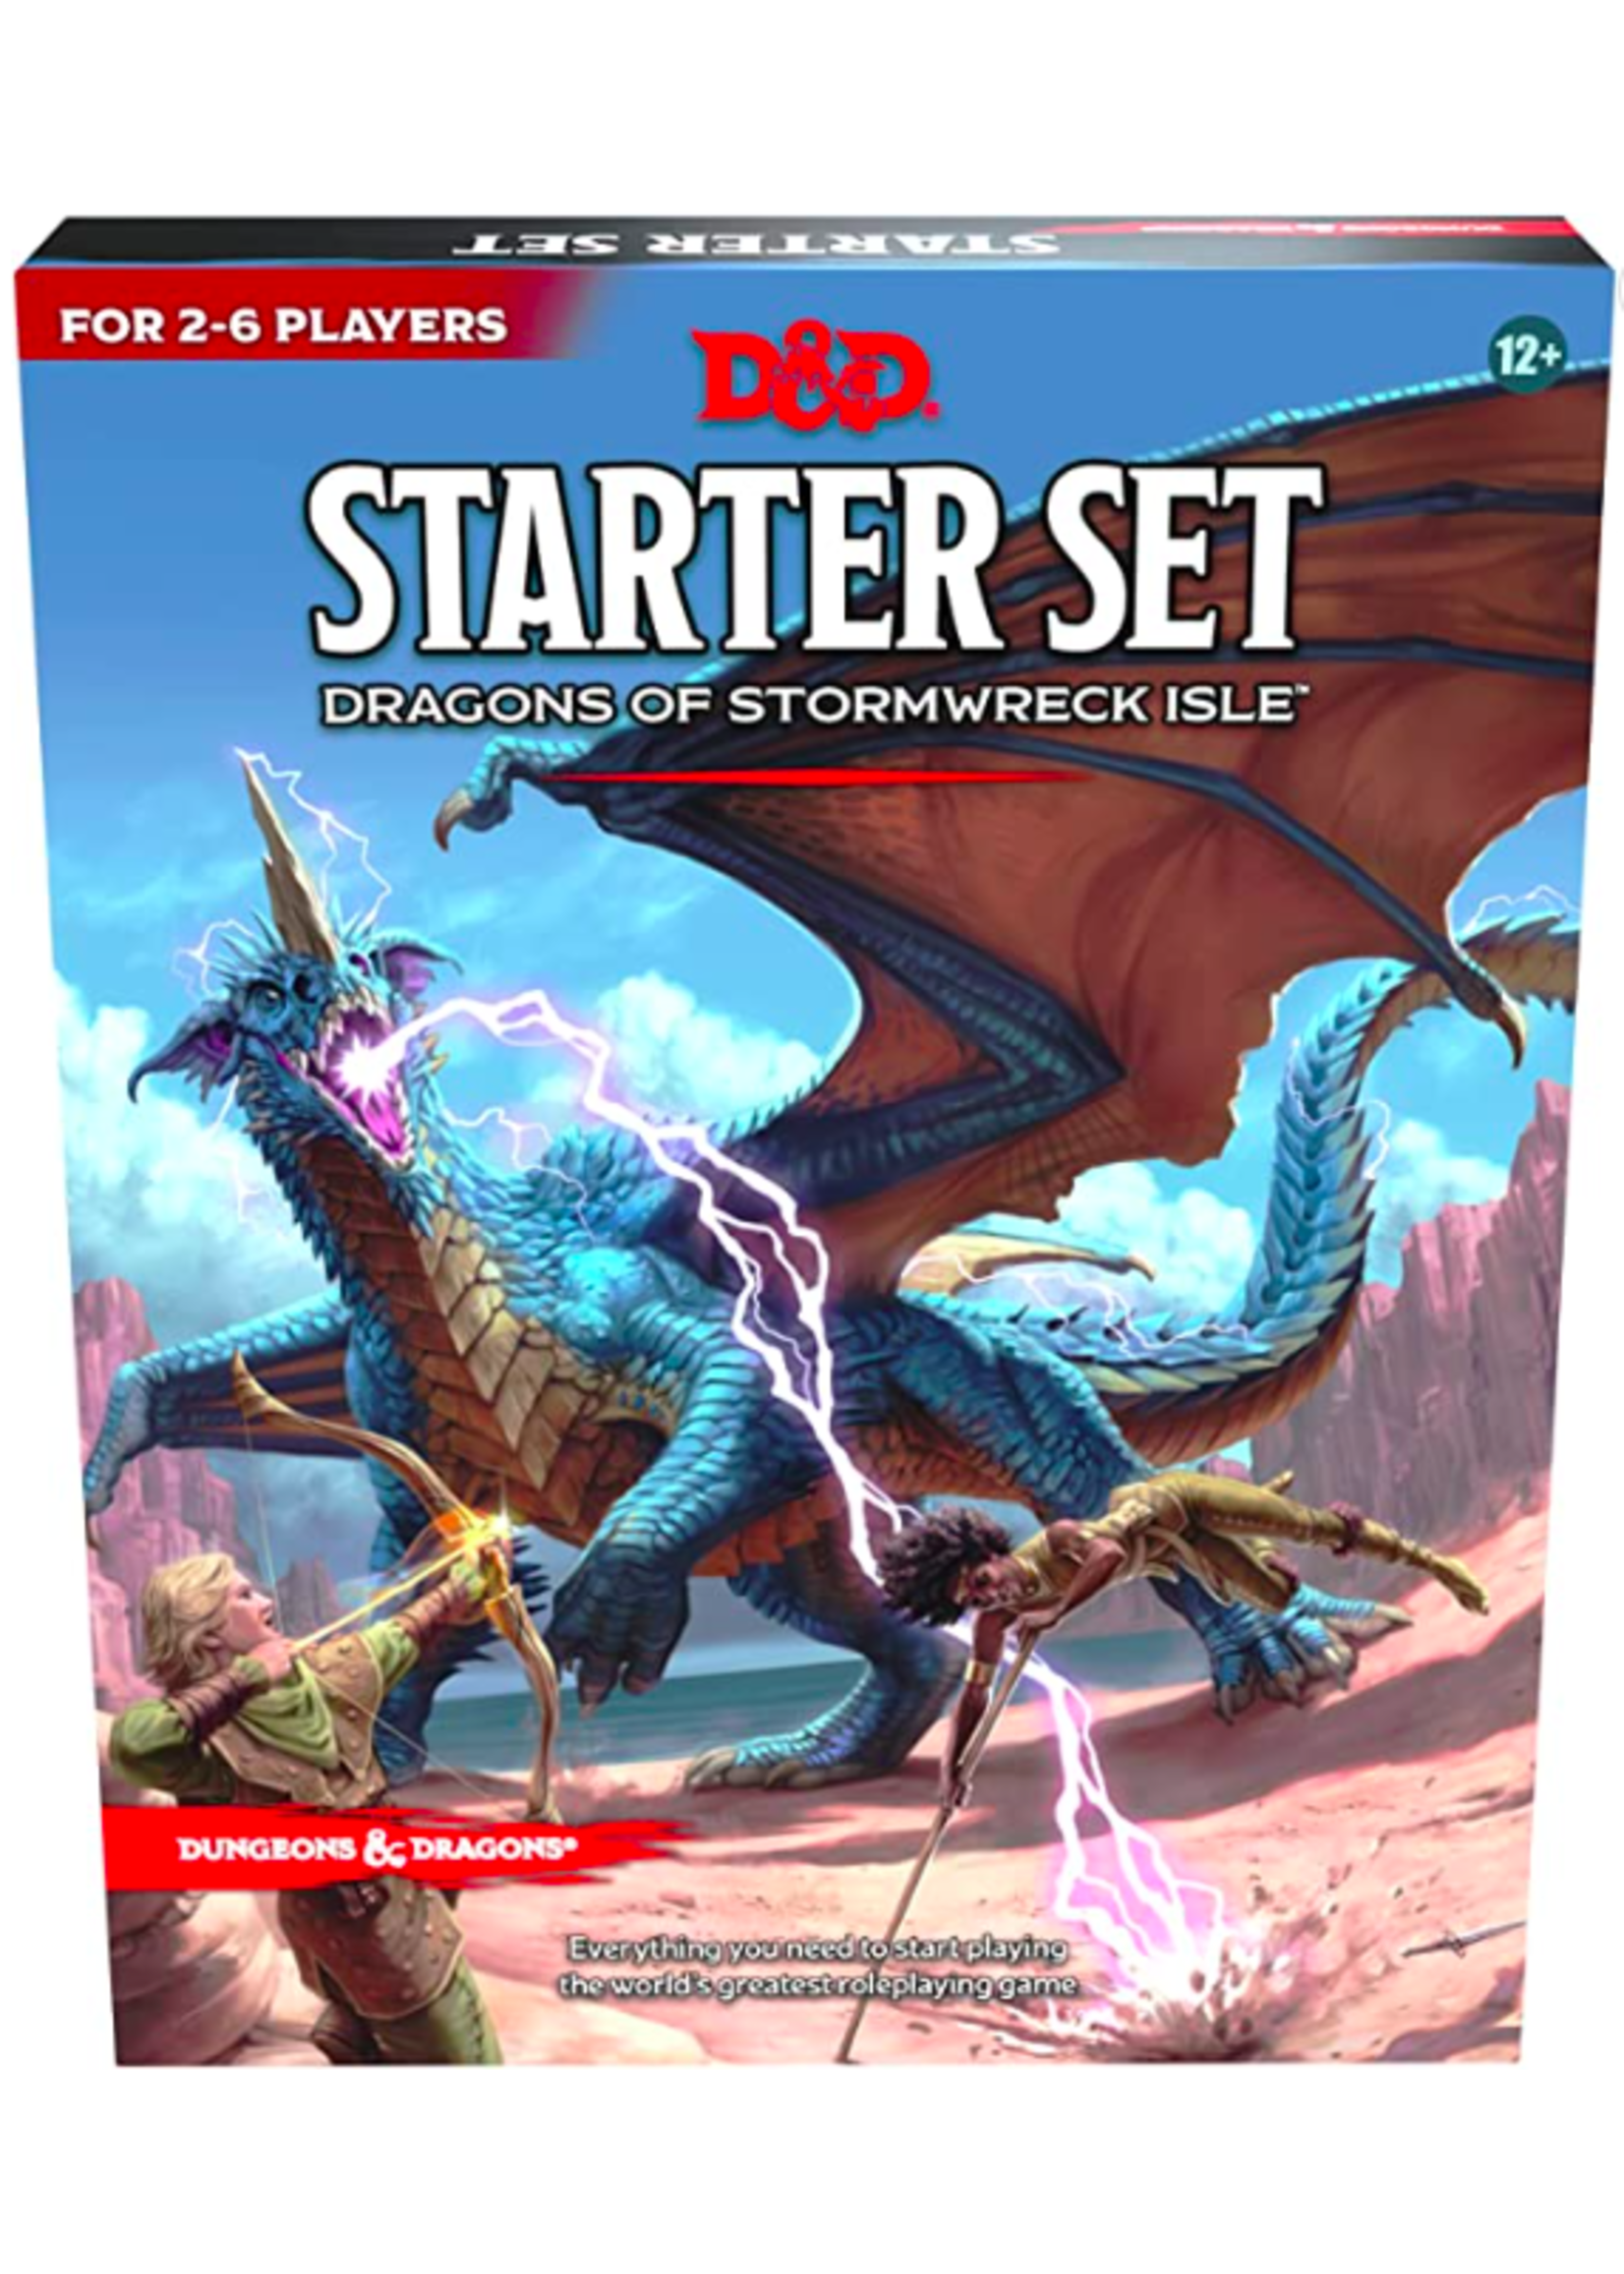 D&D Starter Set: Dragons of Stormwreck Isle by WotC